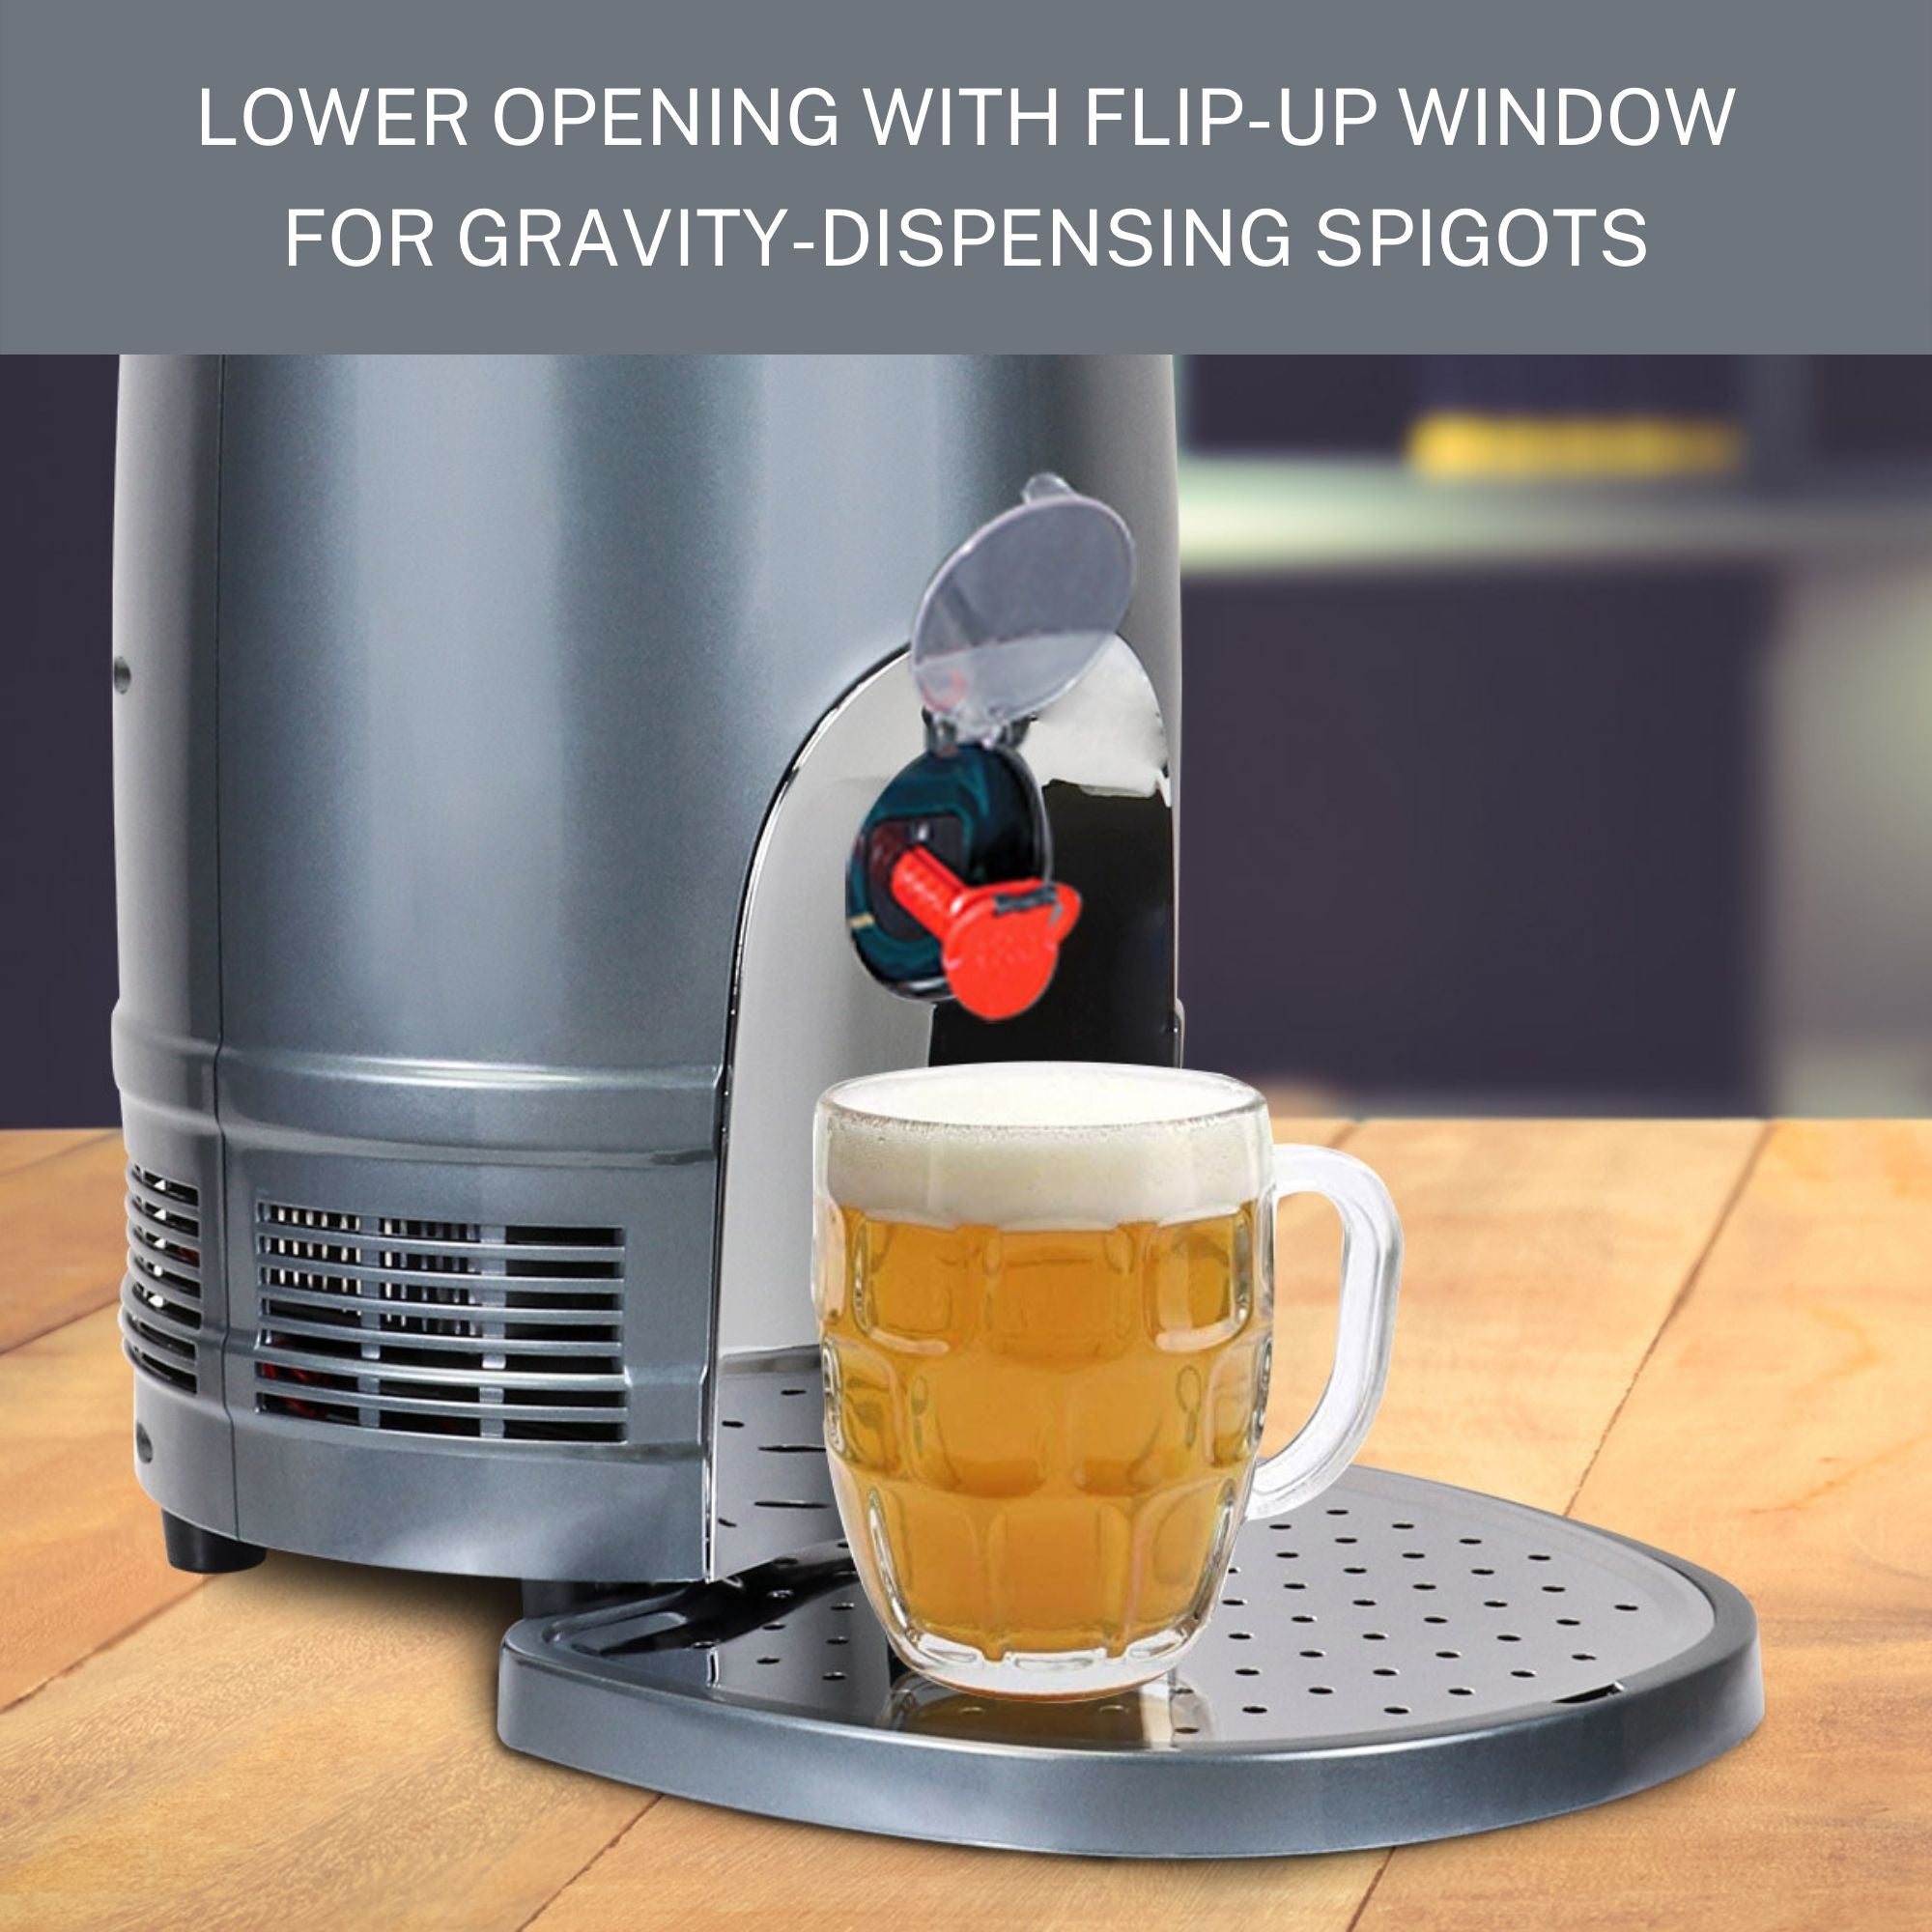 Lifestyle image shows the bottom half of the mini keg cooler on a wood plank table with a full beer mug positioned below a red plastic spigot in the lower opening. Text above reads, "Lower opening with flip-up window for gravity-dispensing spigots."